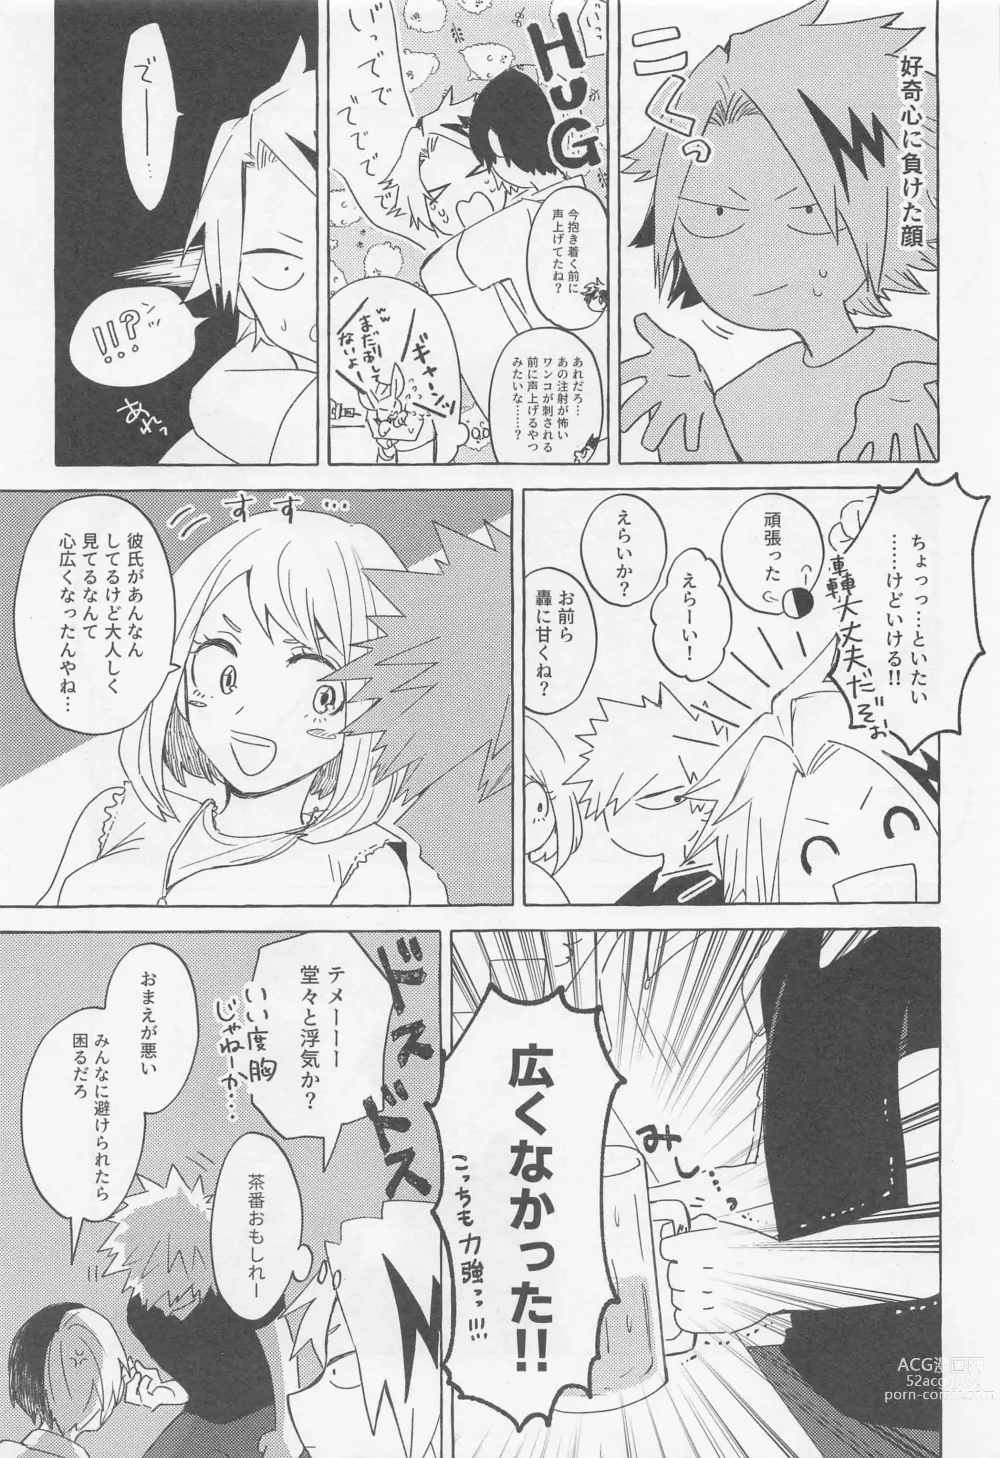 Page 10 of doujinshi Overnight Fight